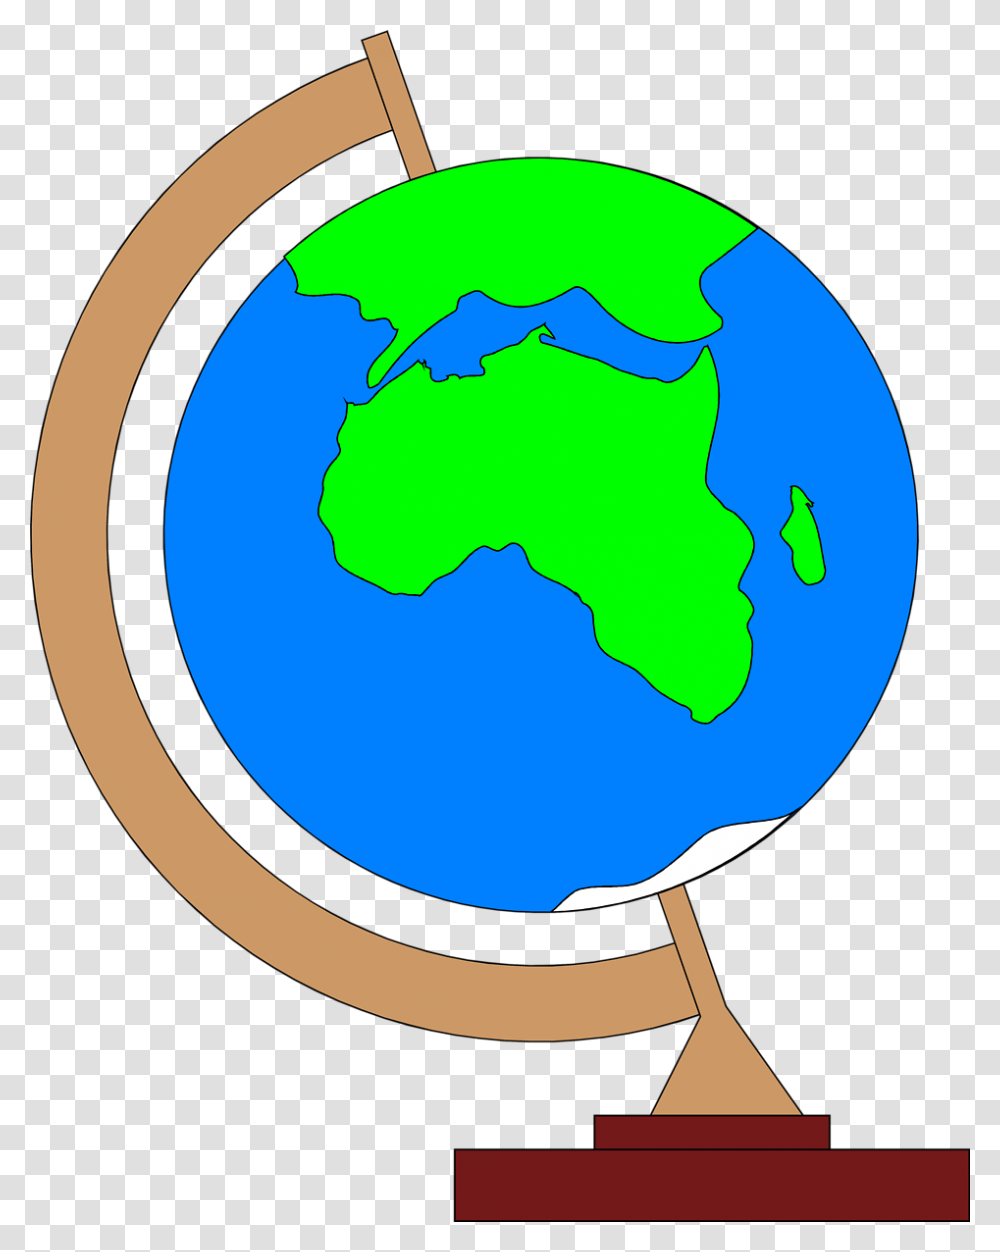 Globe Earth Map Clip Art Illustration Of A Globe, Outer Space, Astronomy, Universe Transparent Png